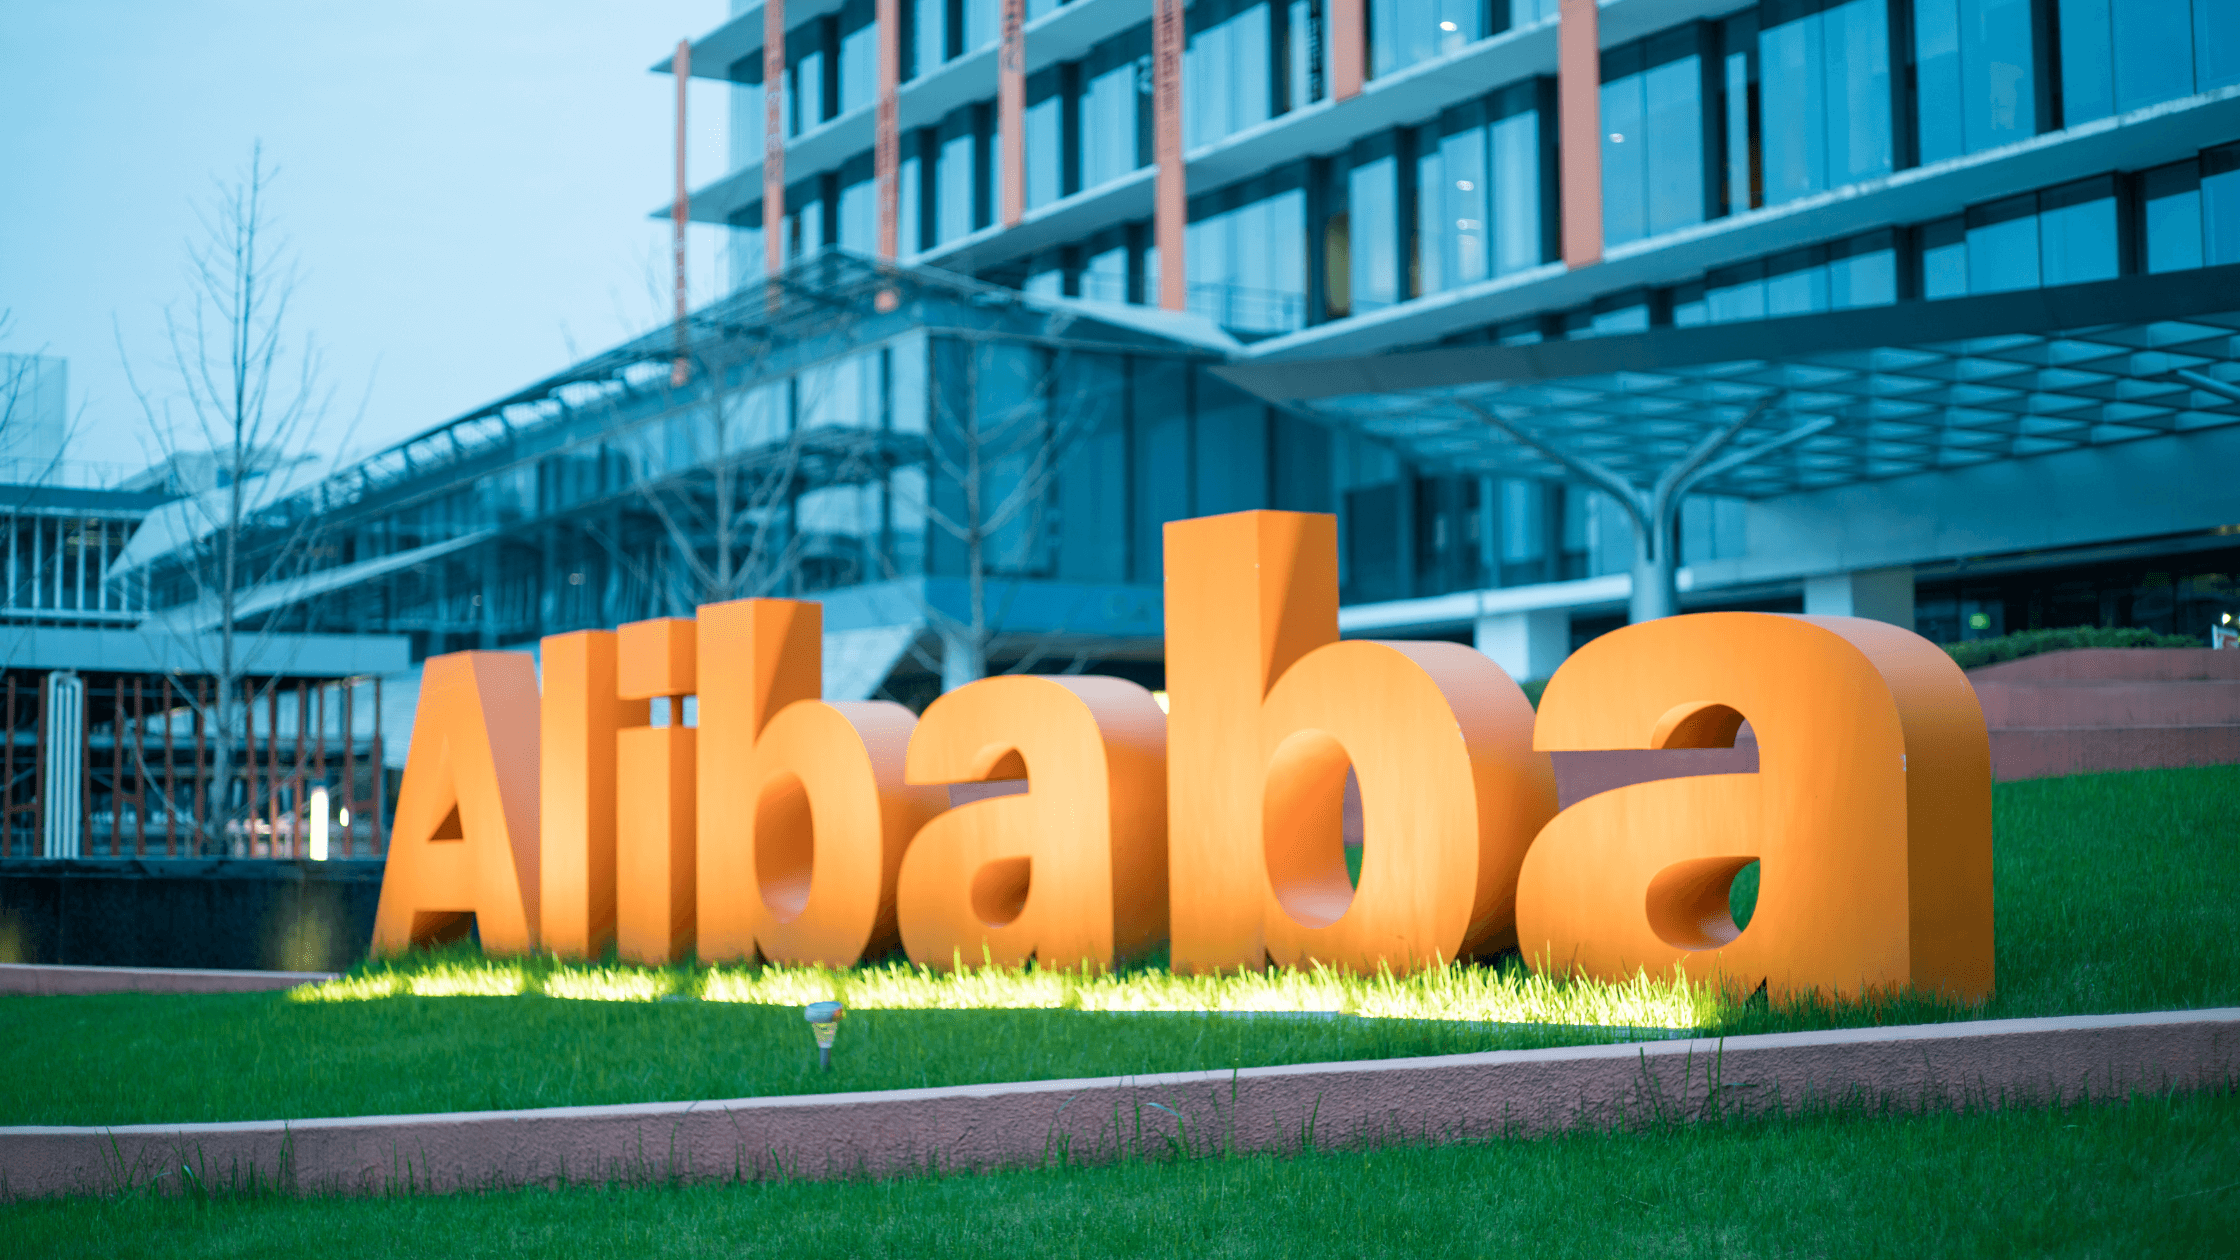 Alibaba Shares Plunge: Should You Buy Now?